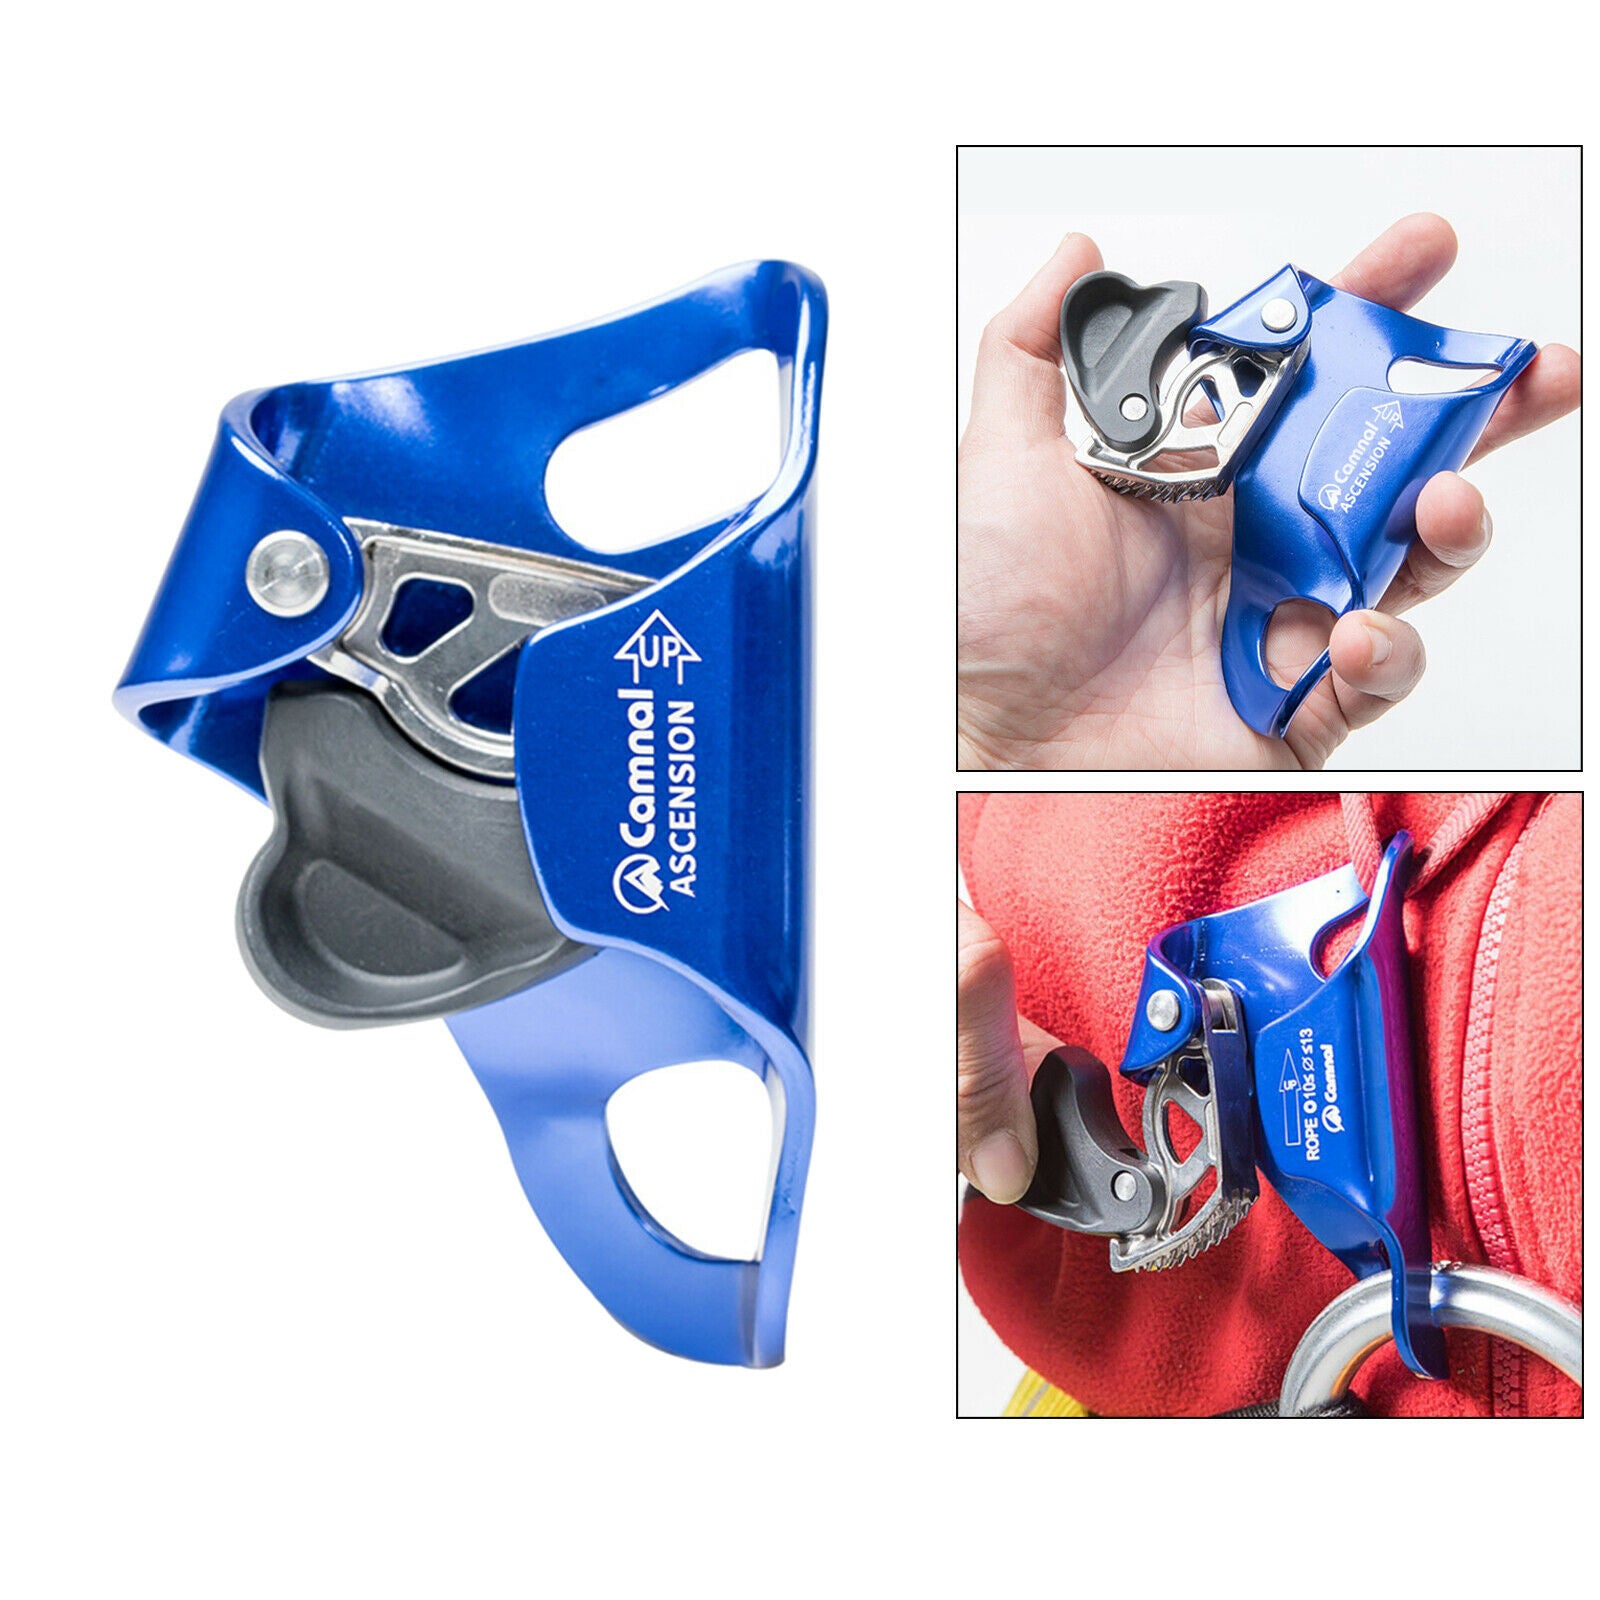 Climbing Chest Ascender Hand Ascender Rigging Sport Caving Accessories